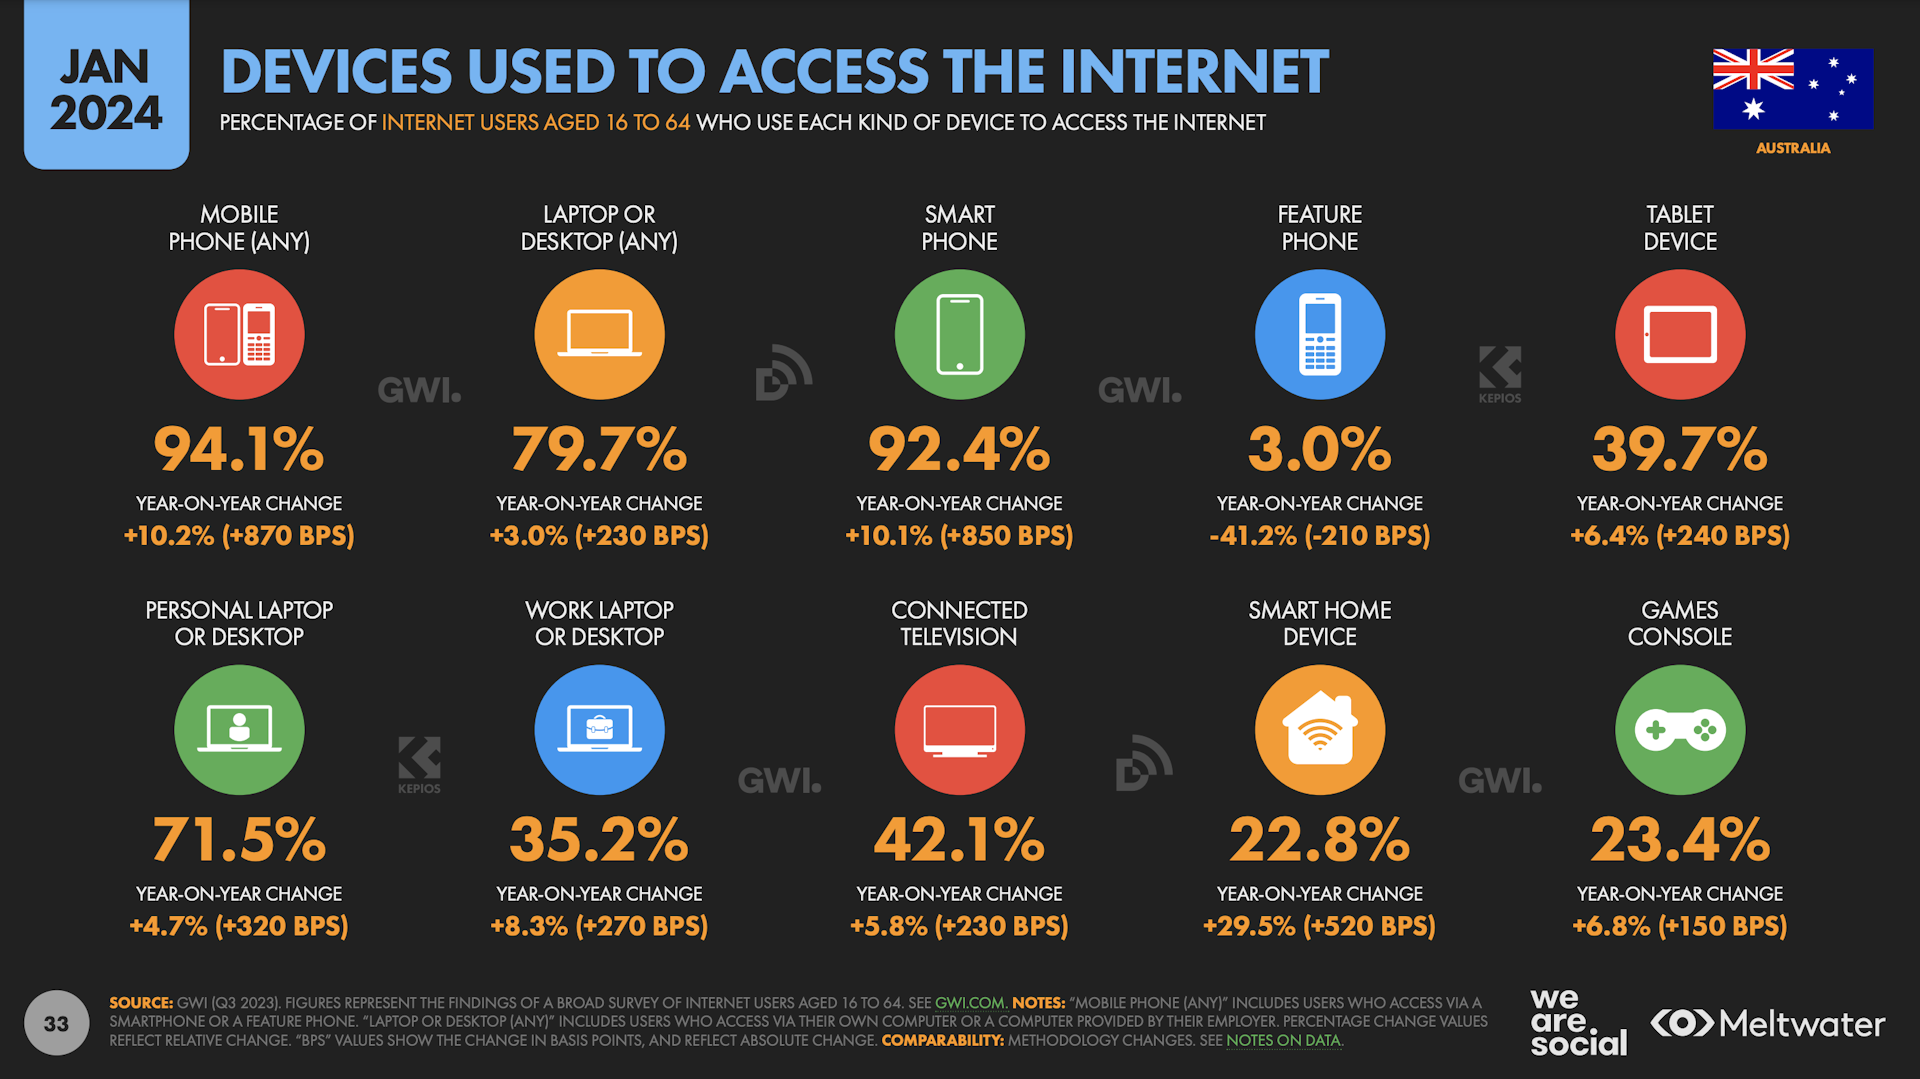 Devices used to access the internet based on Global Digital Report 2024 for Australia